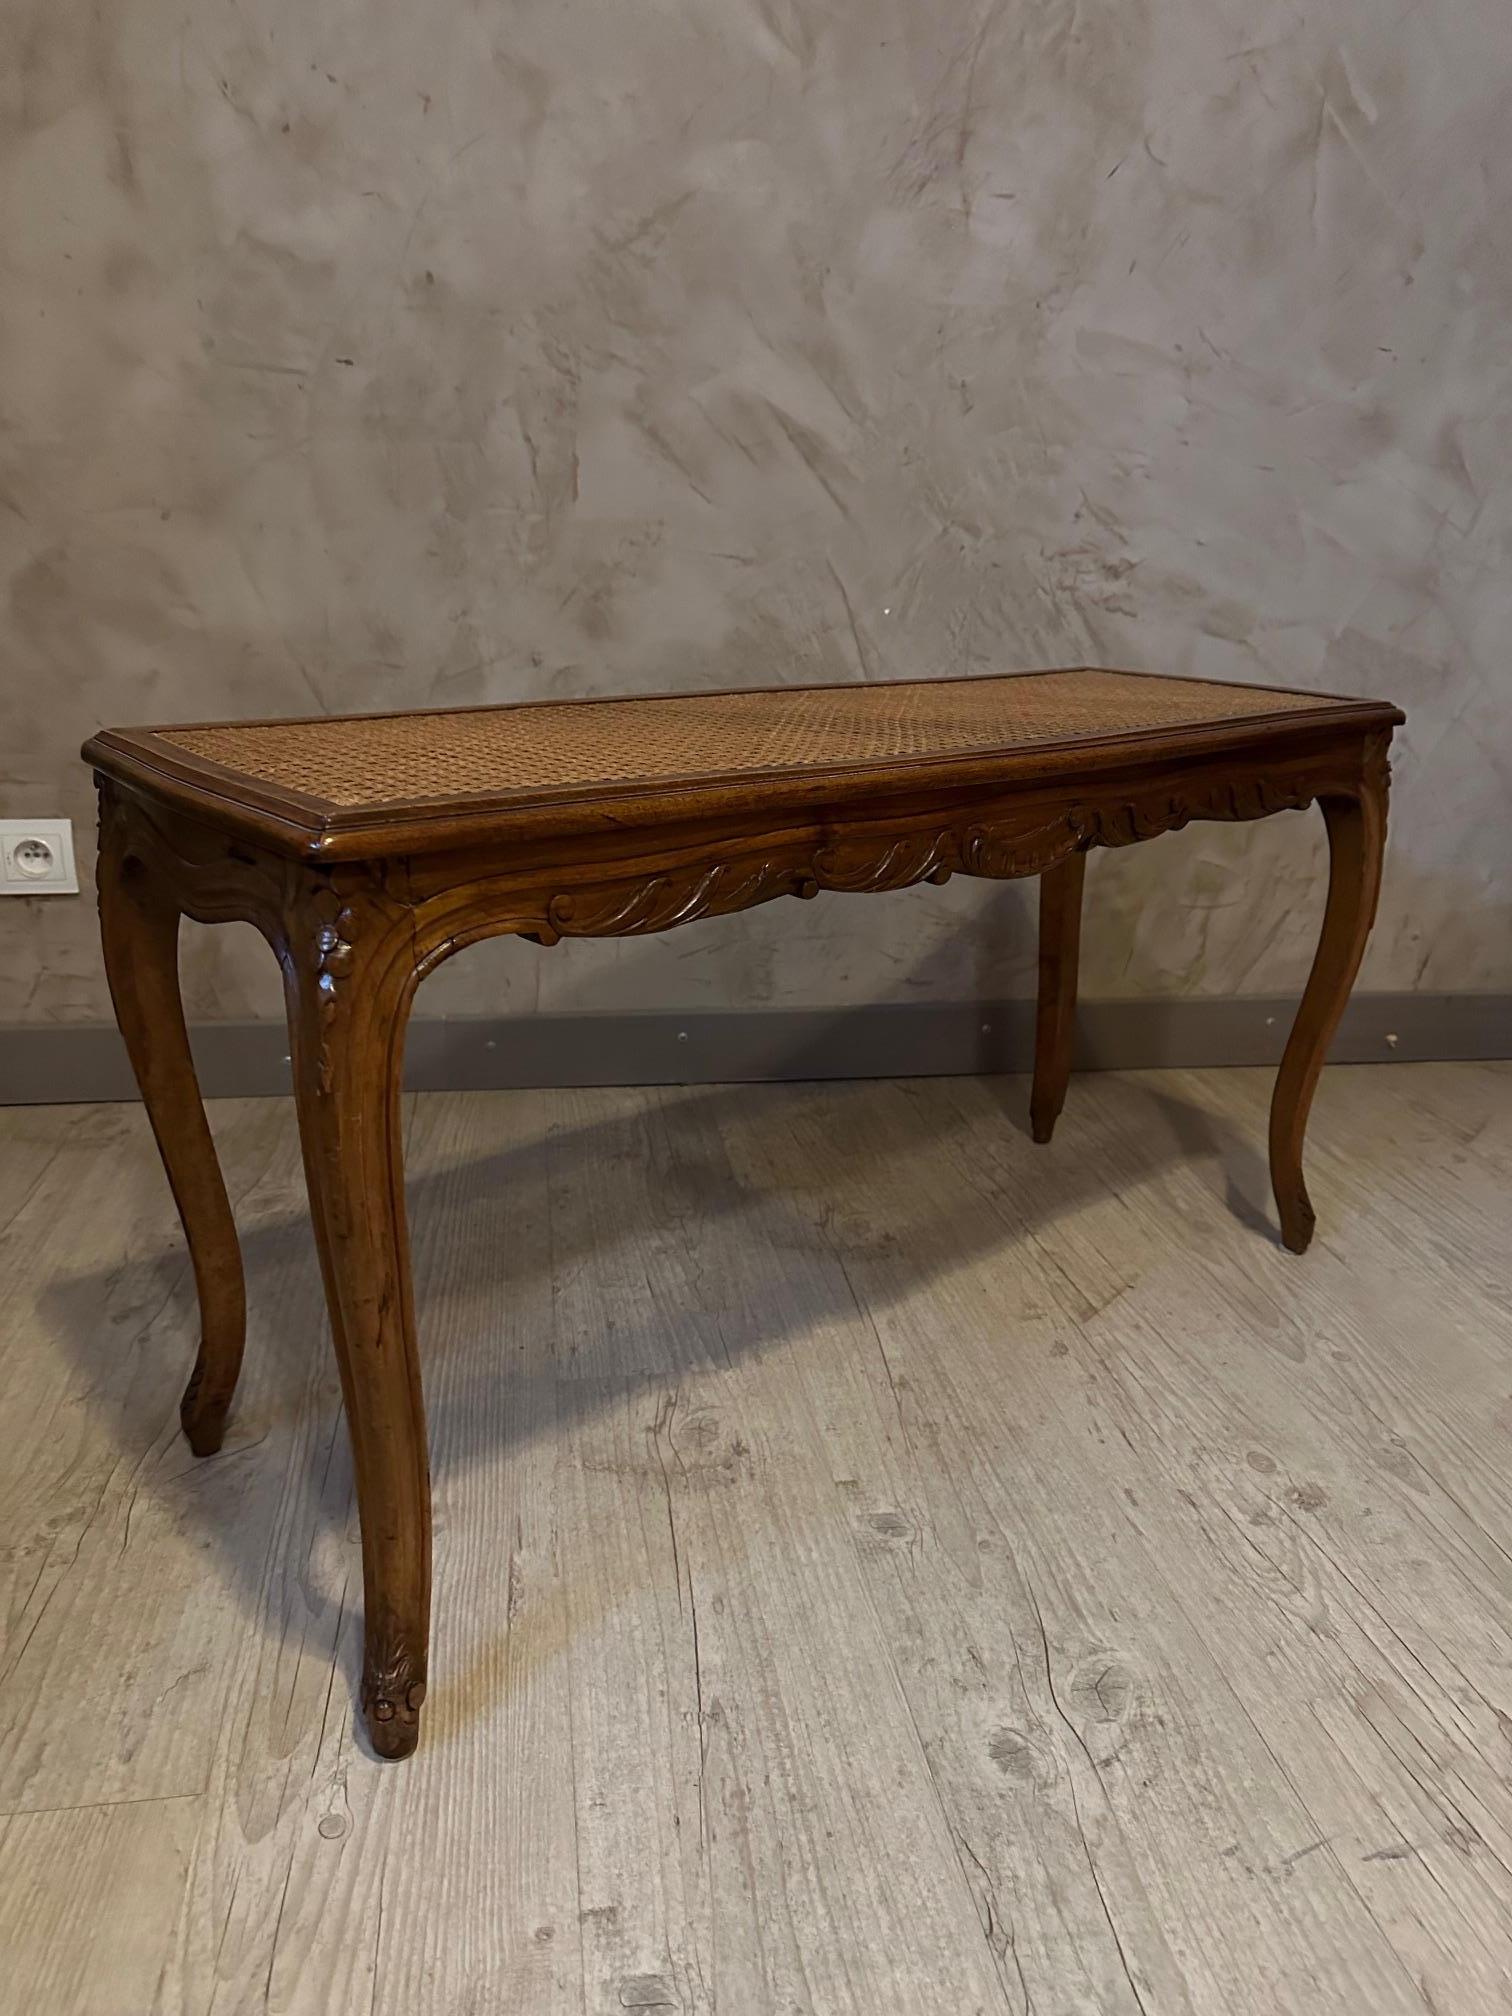 Very nice Louis XV style walnut caned bench dating from 1900. 
Very good condition.
Canework in very good condition.
Ideal at the end of a bed or in an entryway.